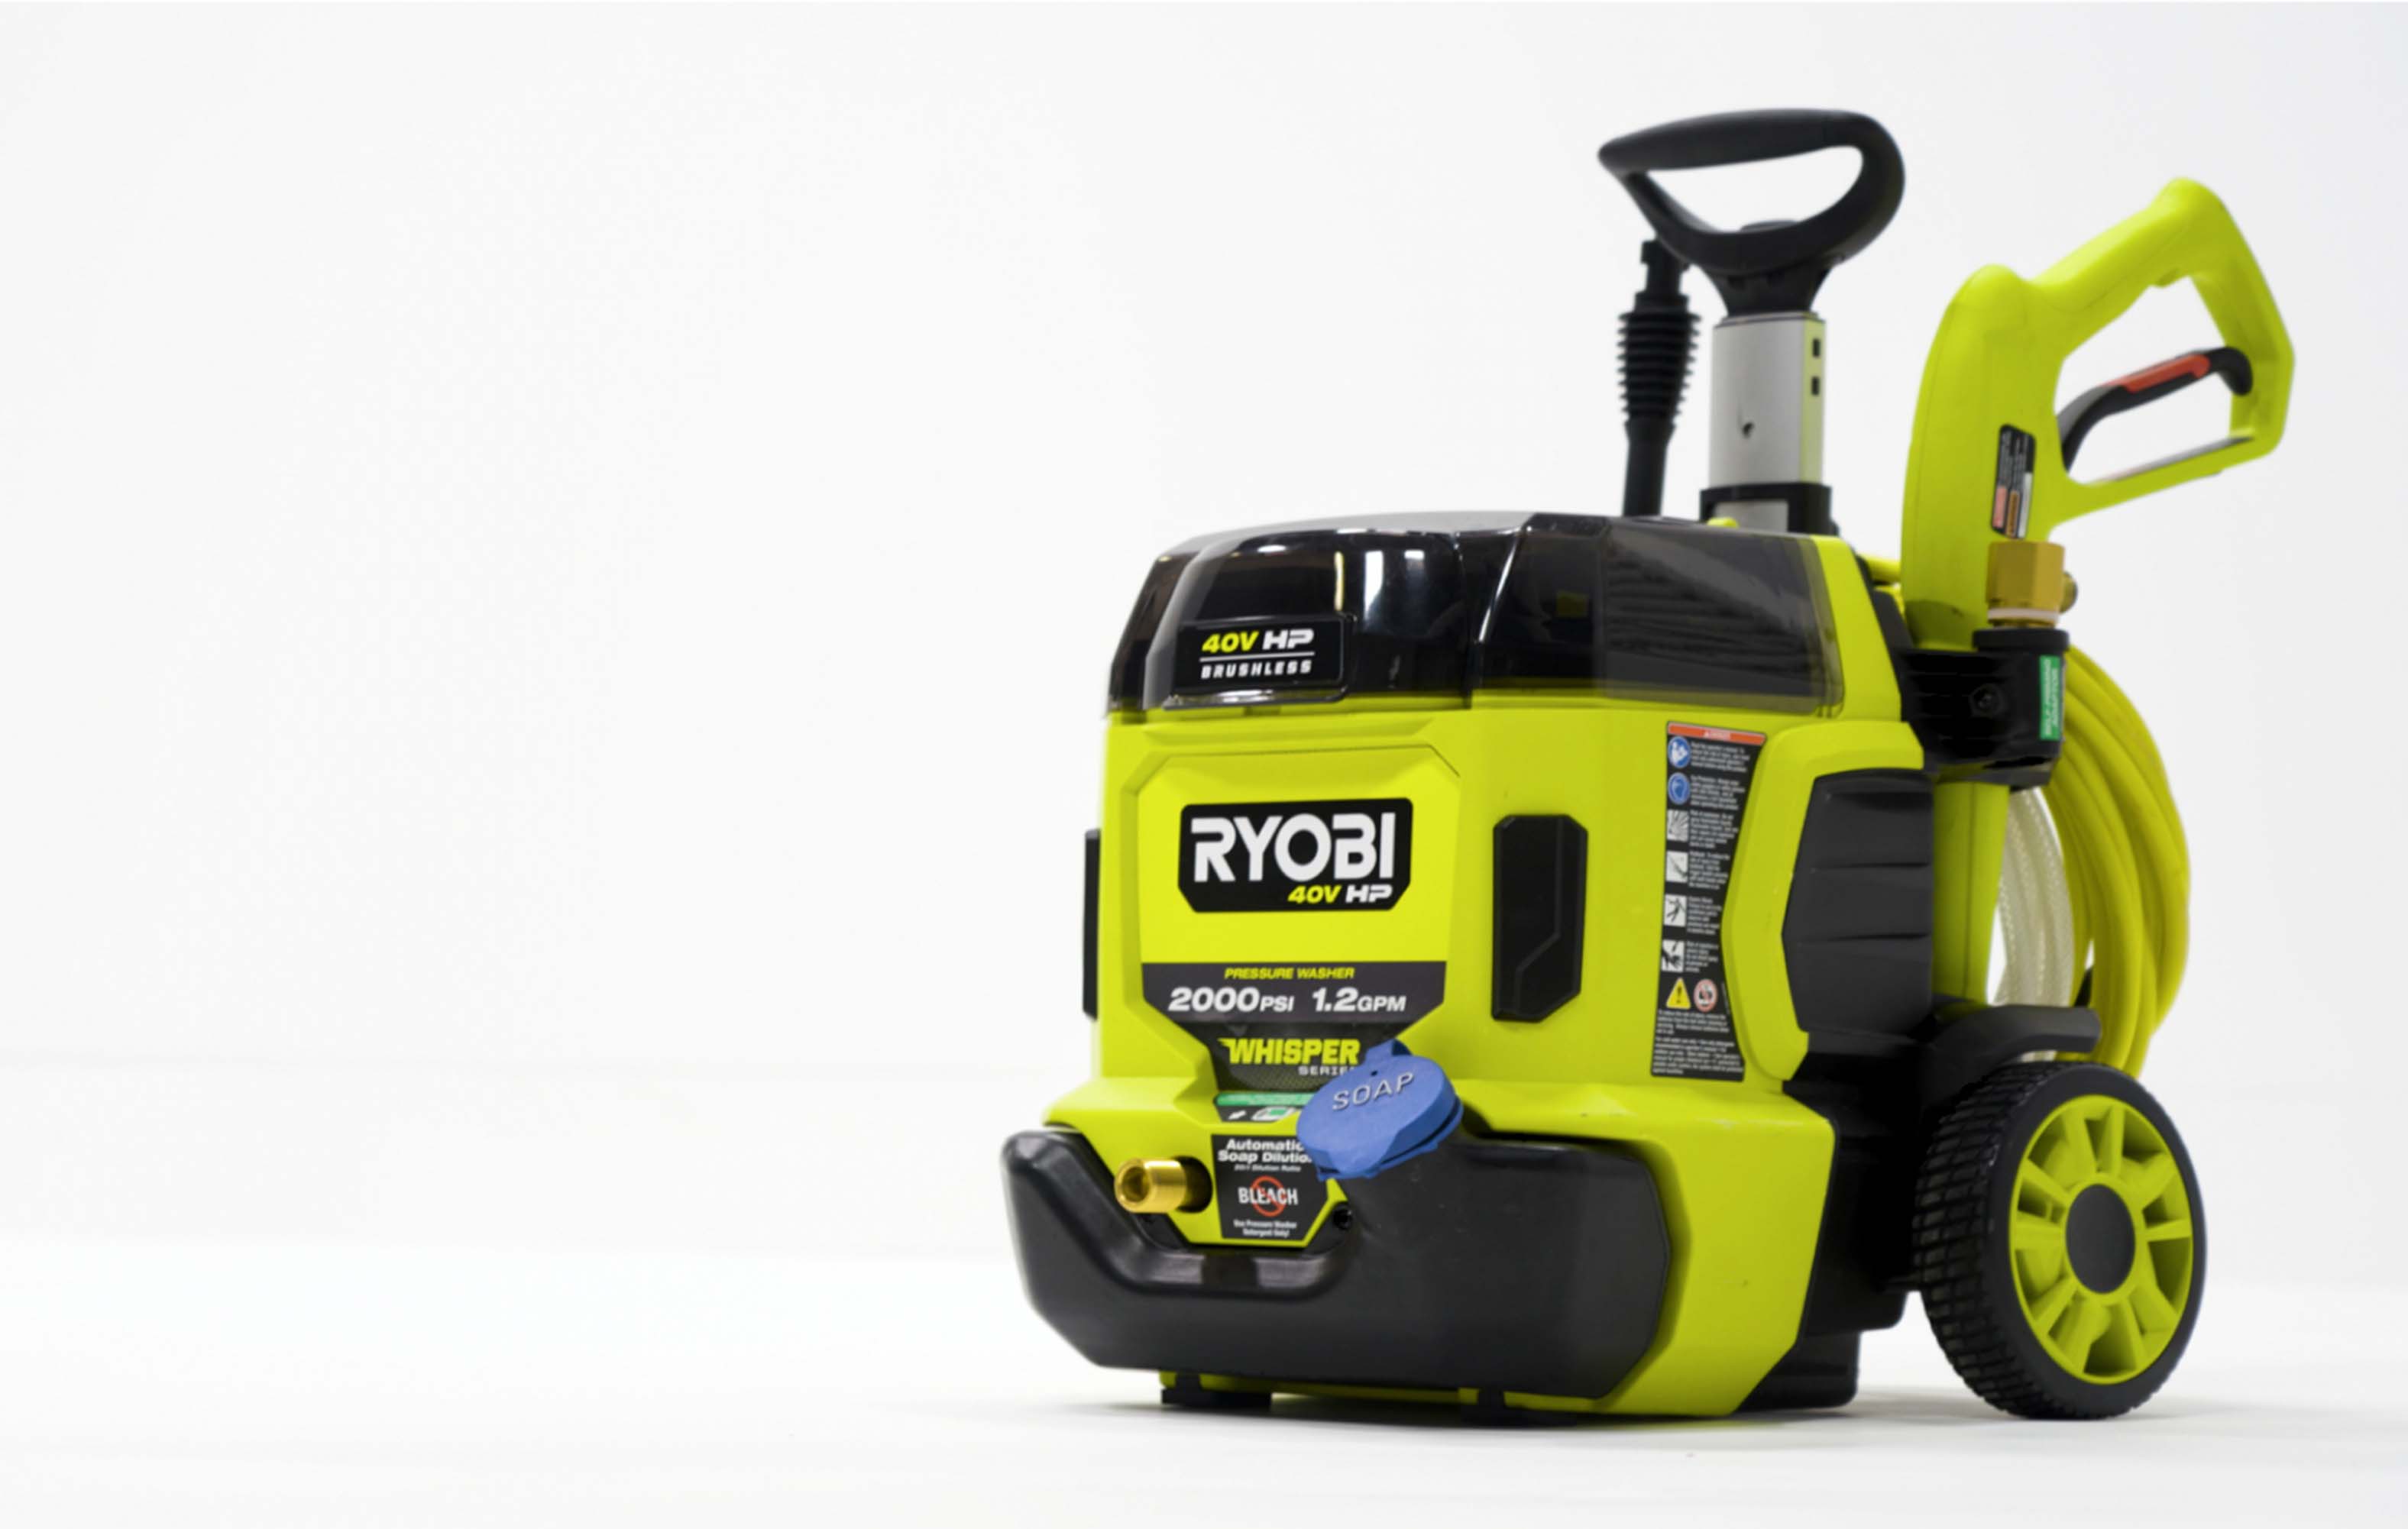 RYOBI Cleaning Products